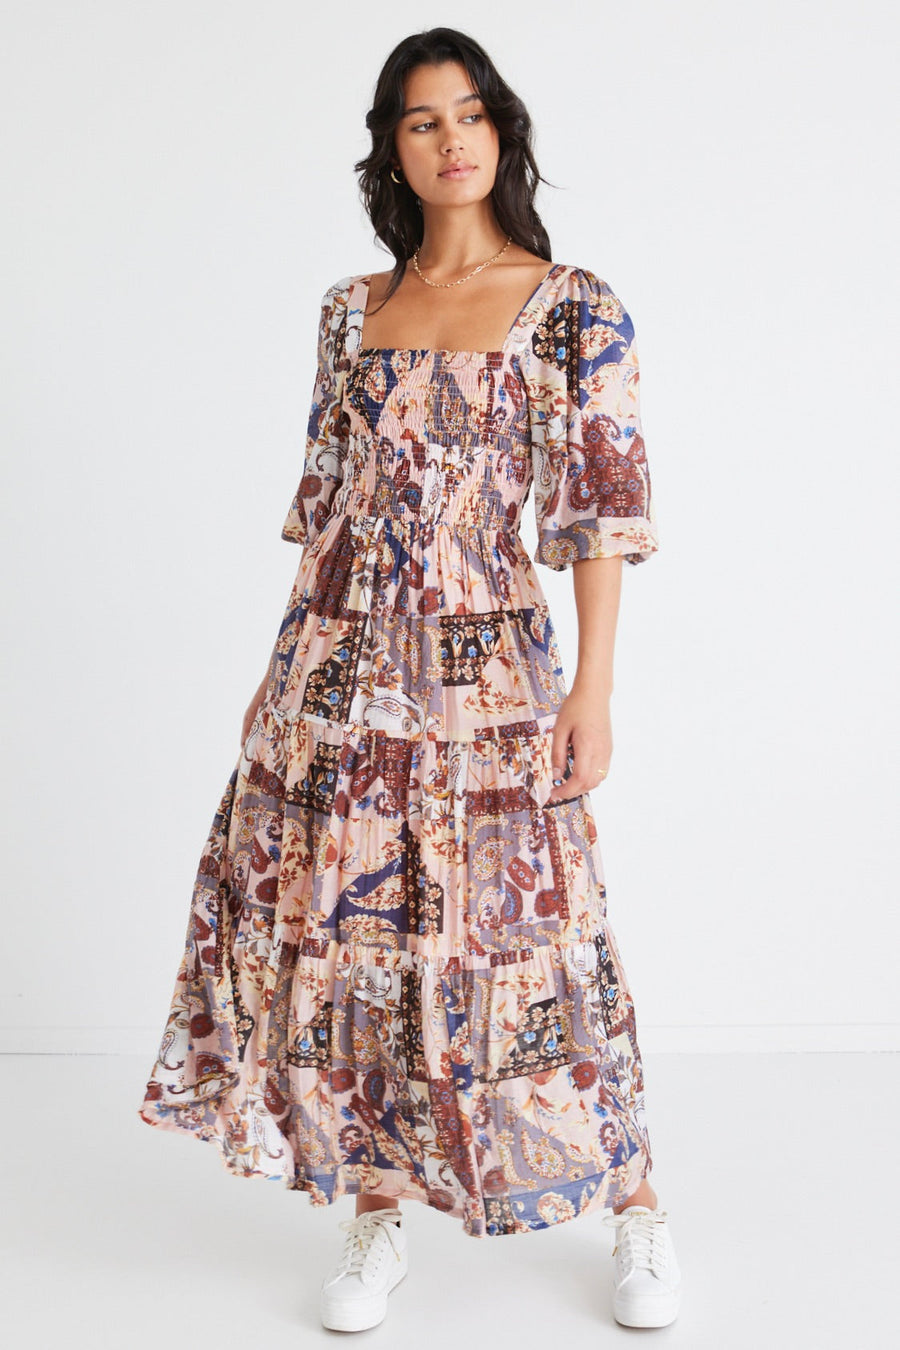 AMONG THE BRAVE MEMORY PATCHWORK PAISLEY LS TIERED MAXI DRESS - WILDROSE